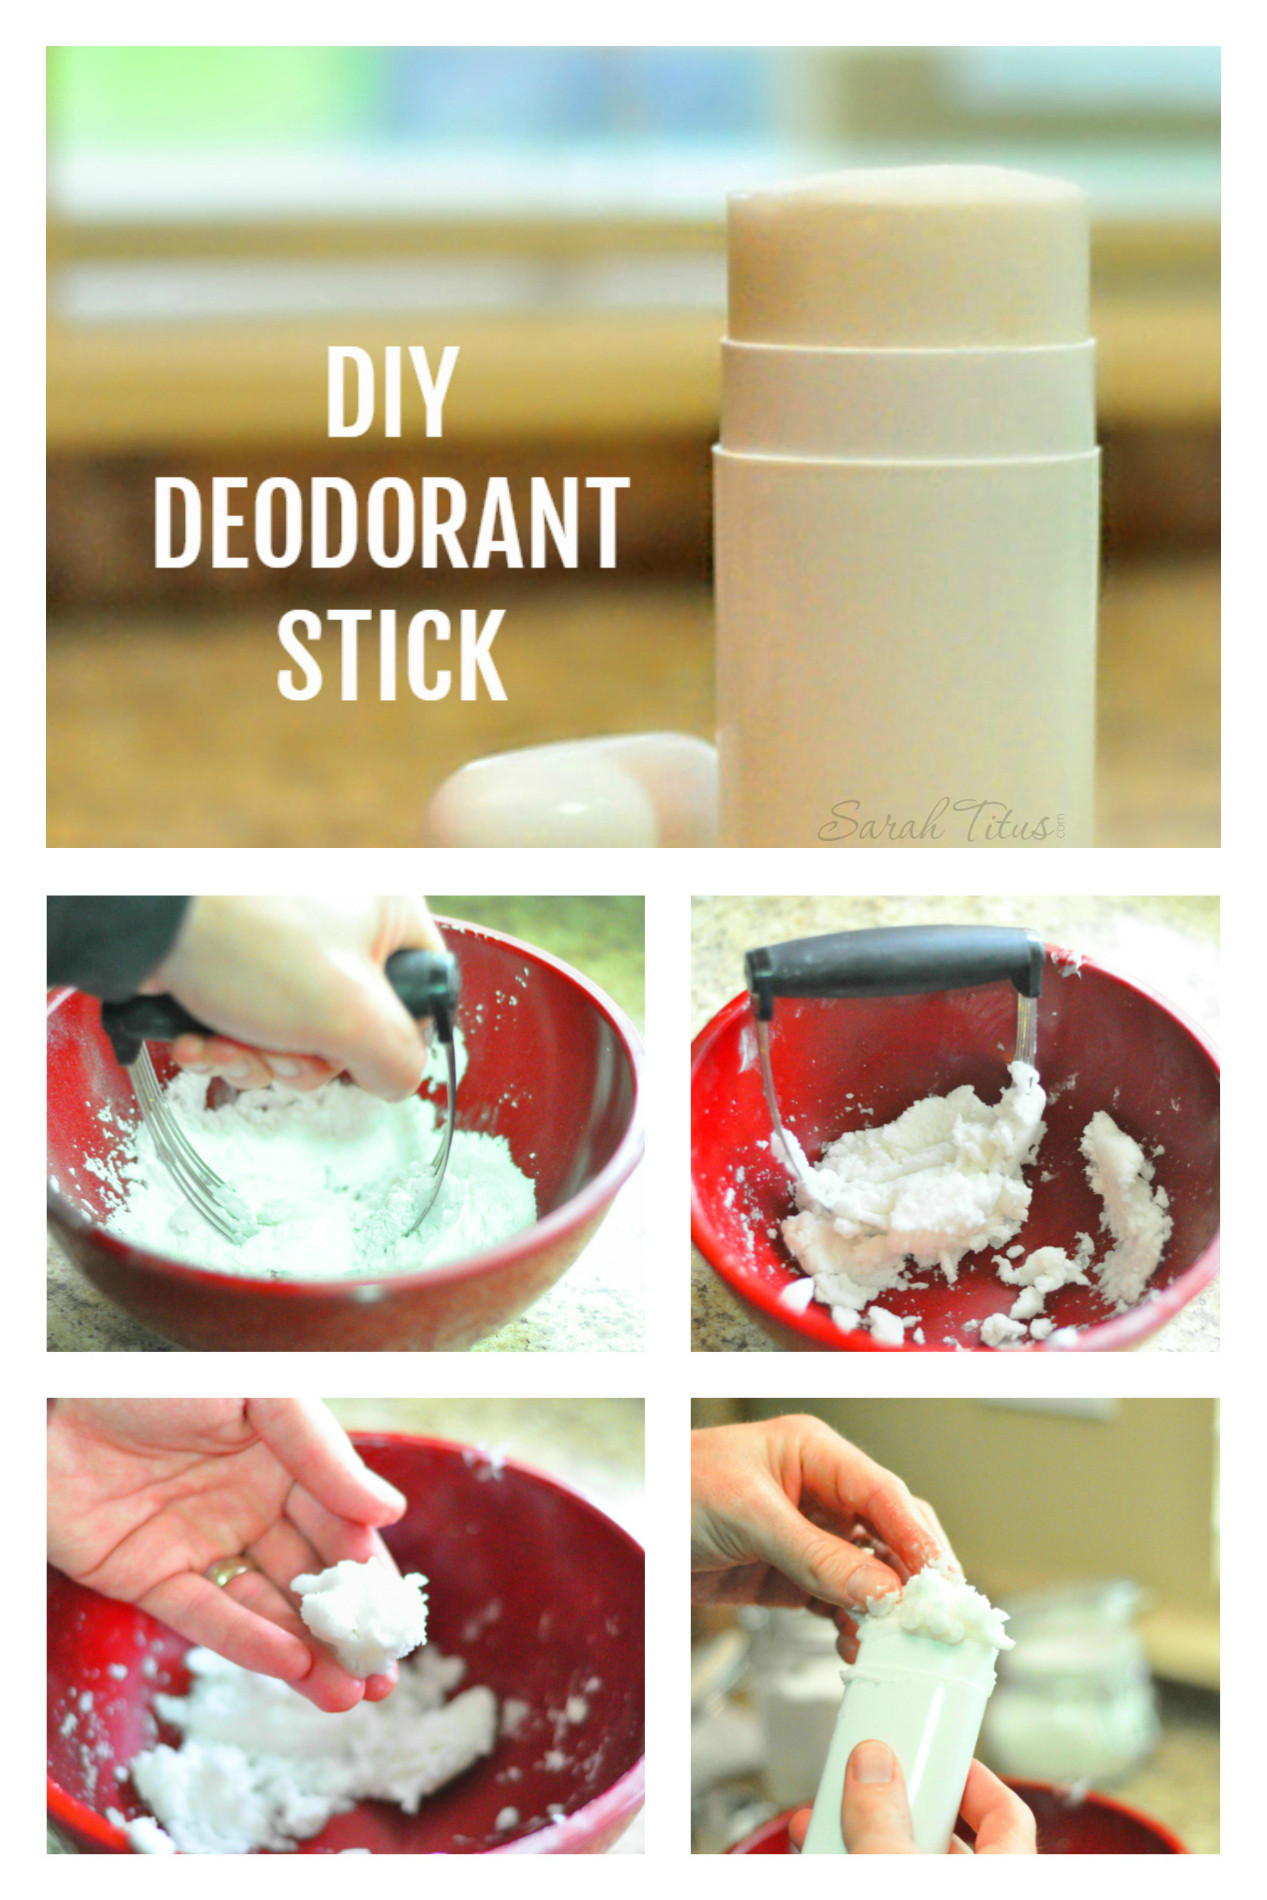 Best ideas about DIY Deodorant Stick
. Save or Pin DIY Deodorant Stick Sarah Titus Now.